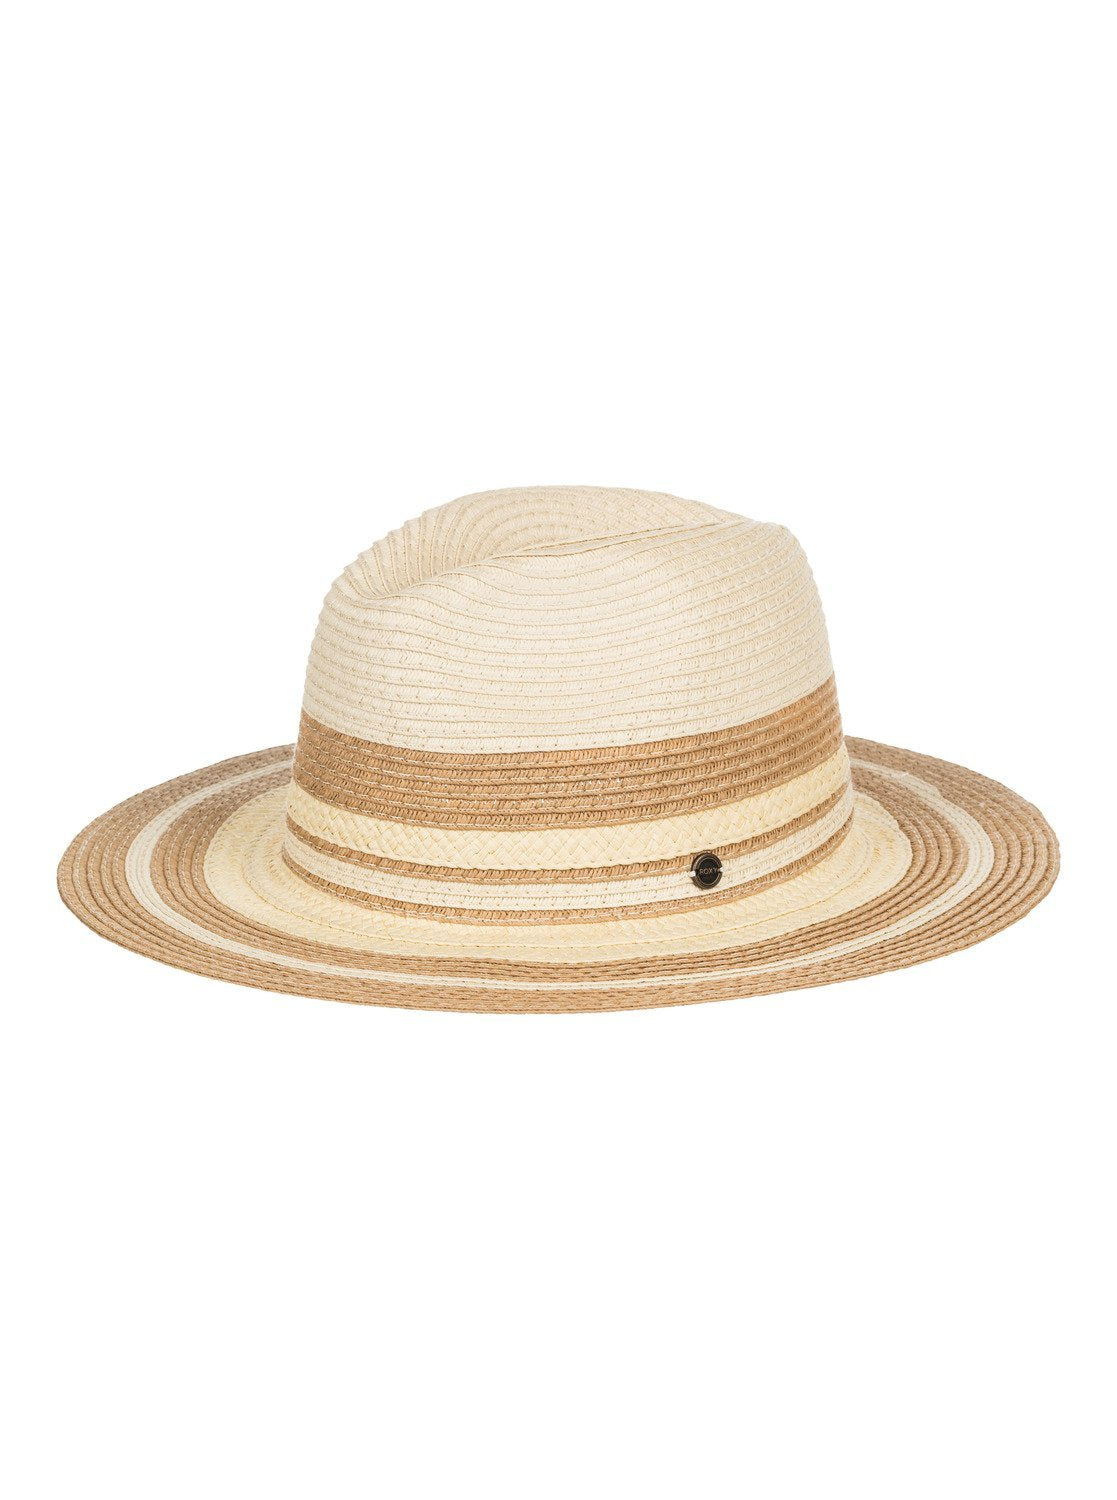 Roxy Sunsets For You Straw Sun Hat